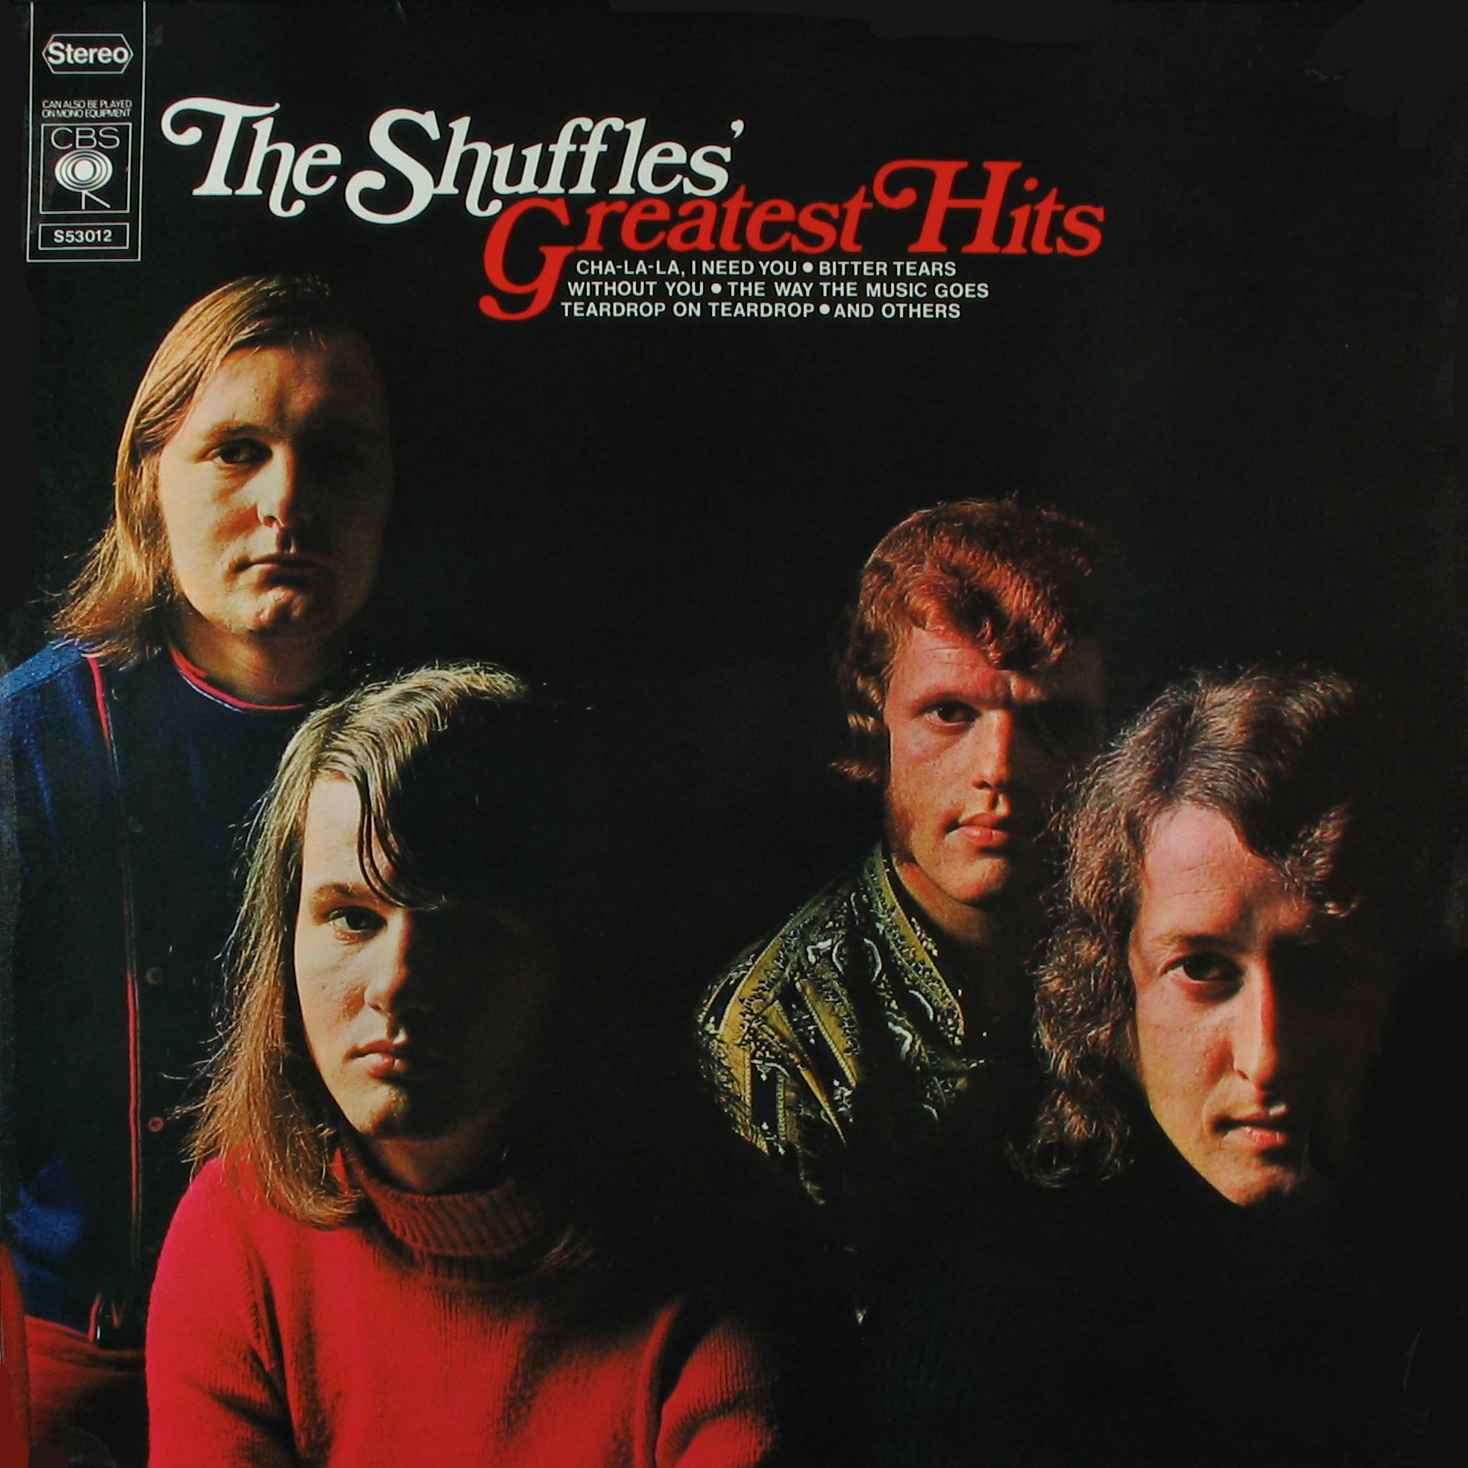 The Shuffles - Greatest hits (repost)